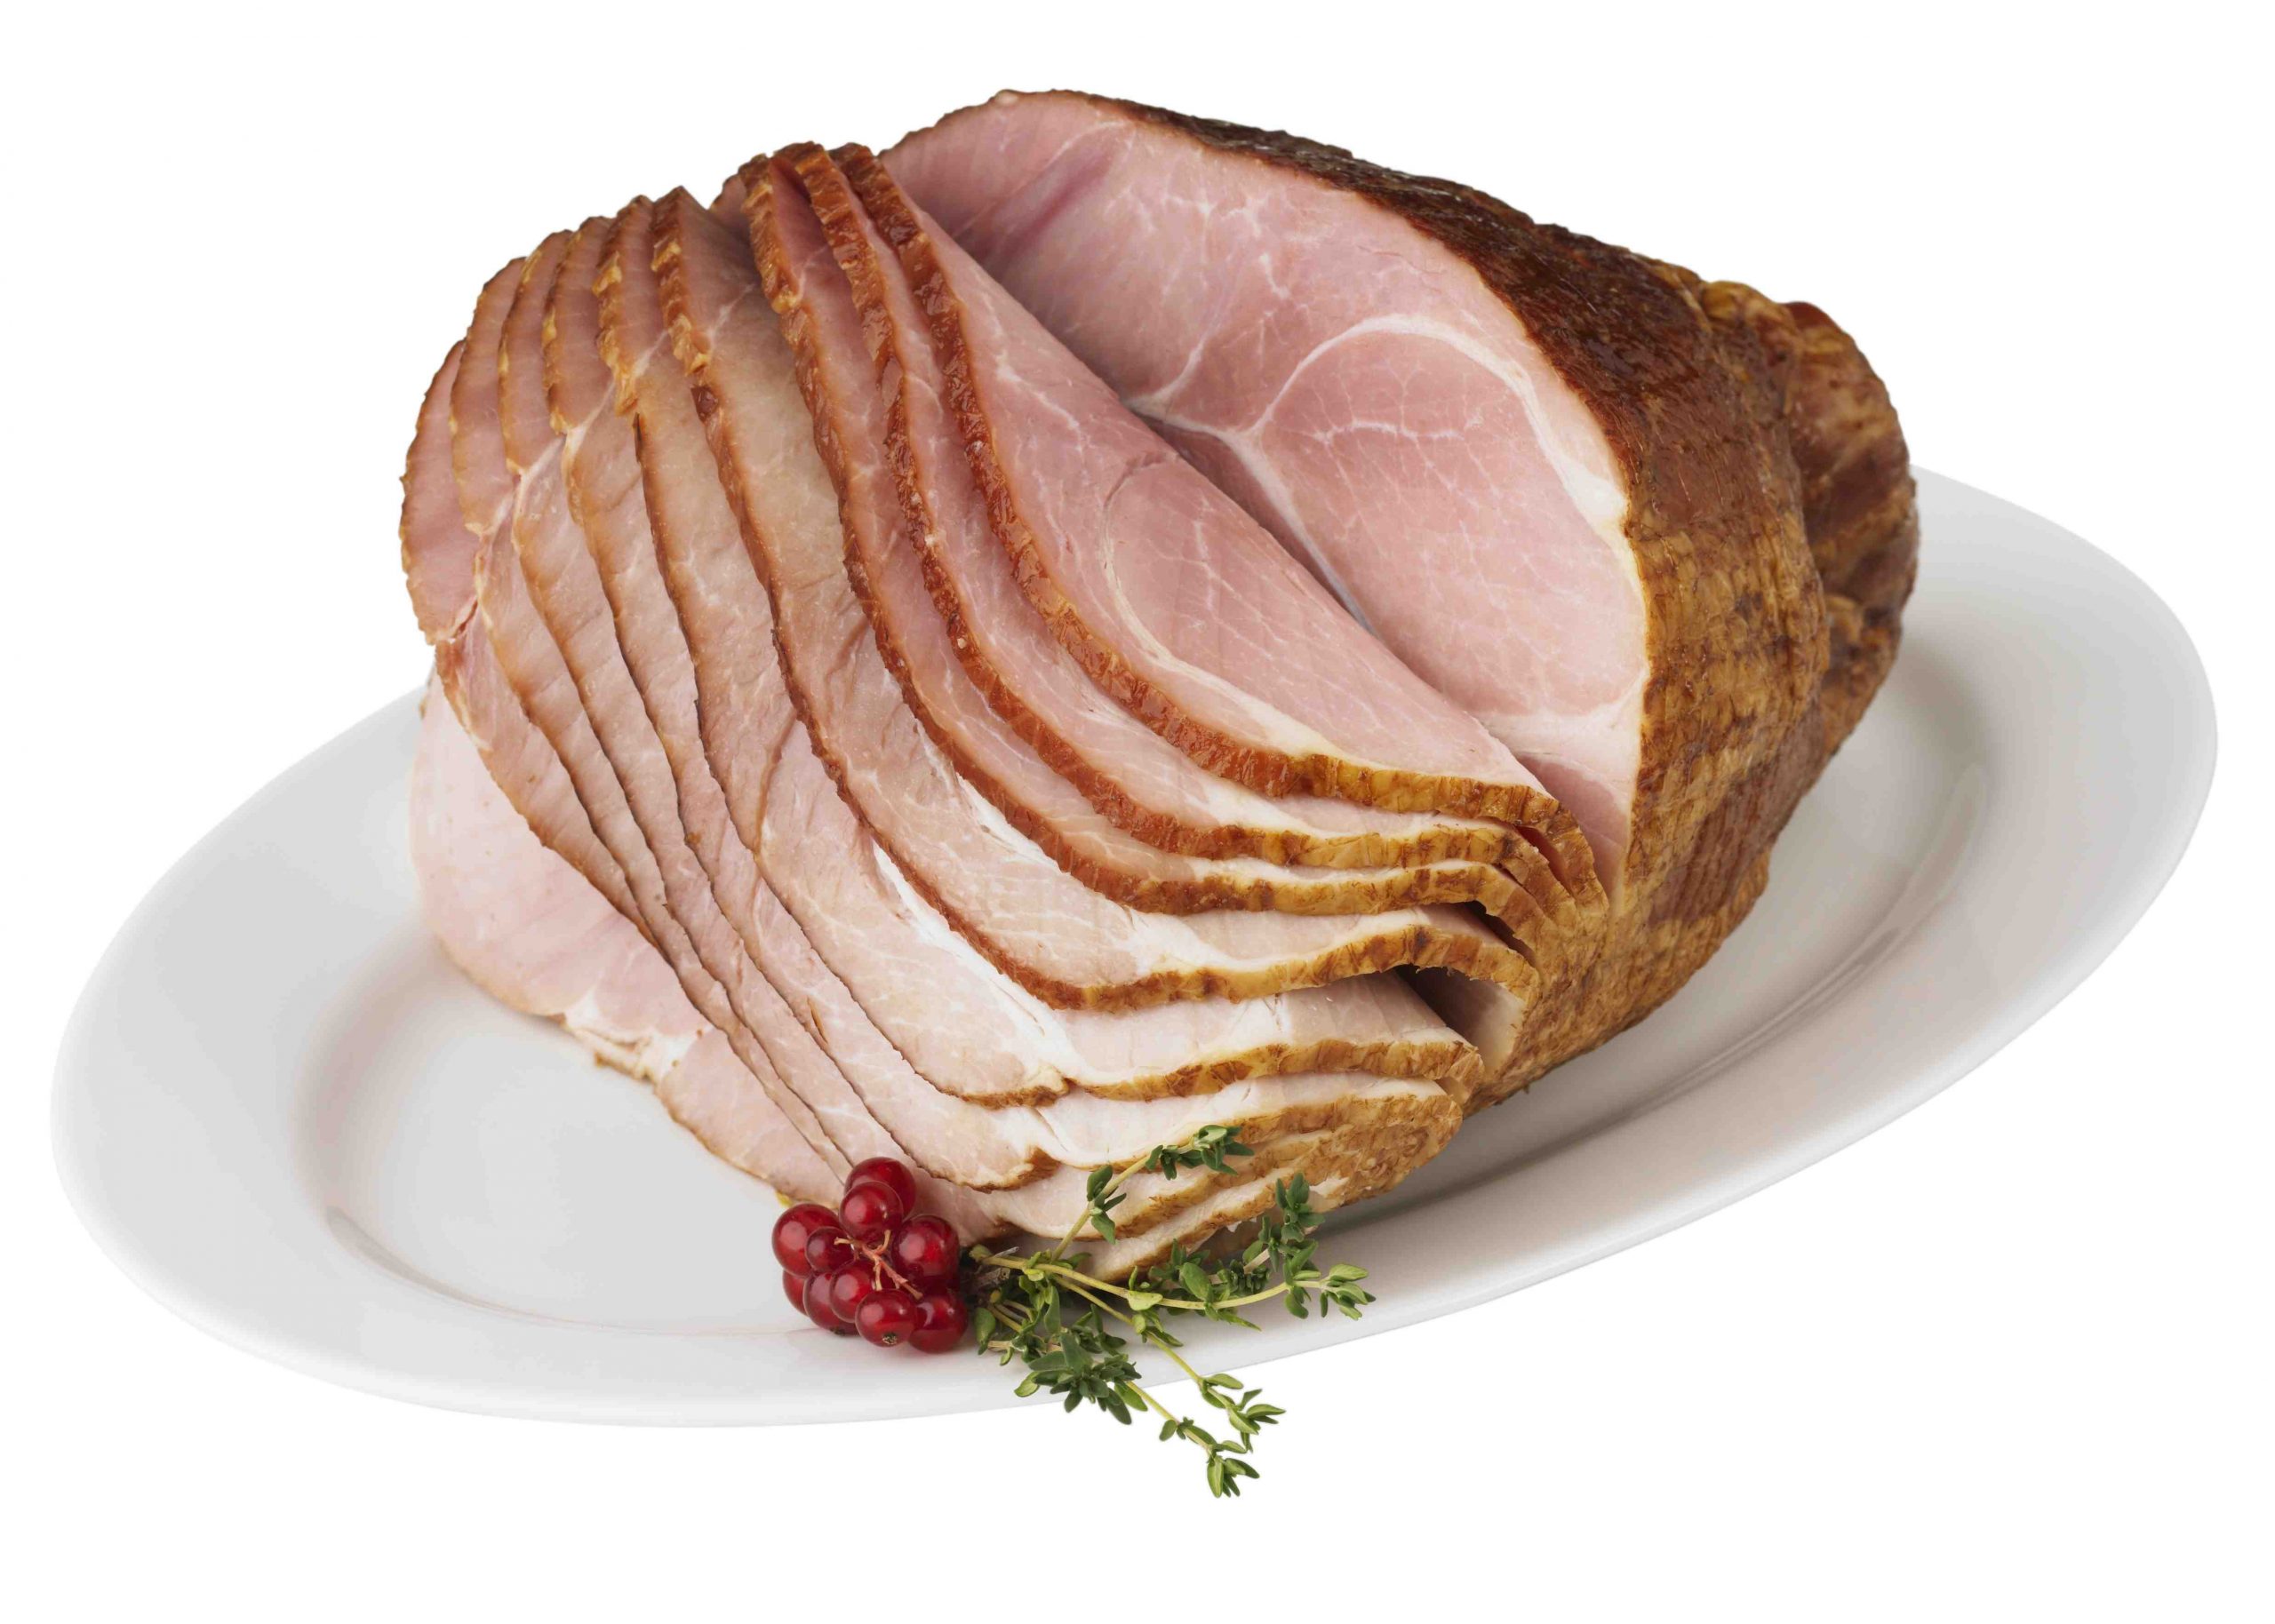 How much is ham at Costco?